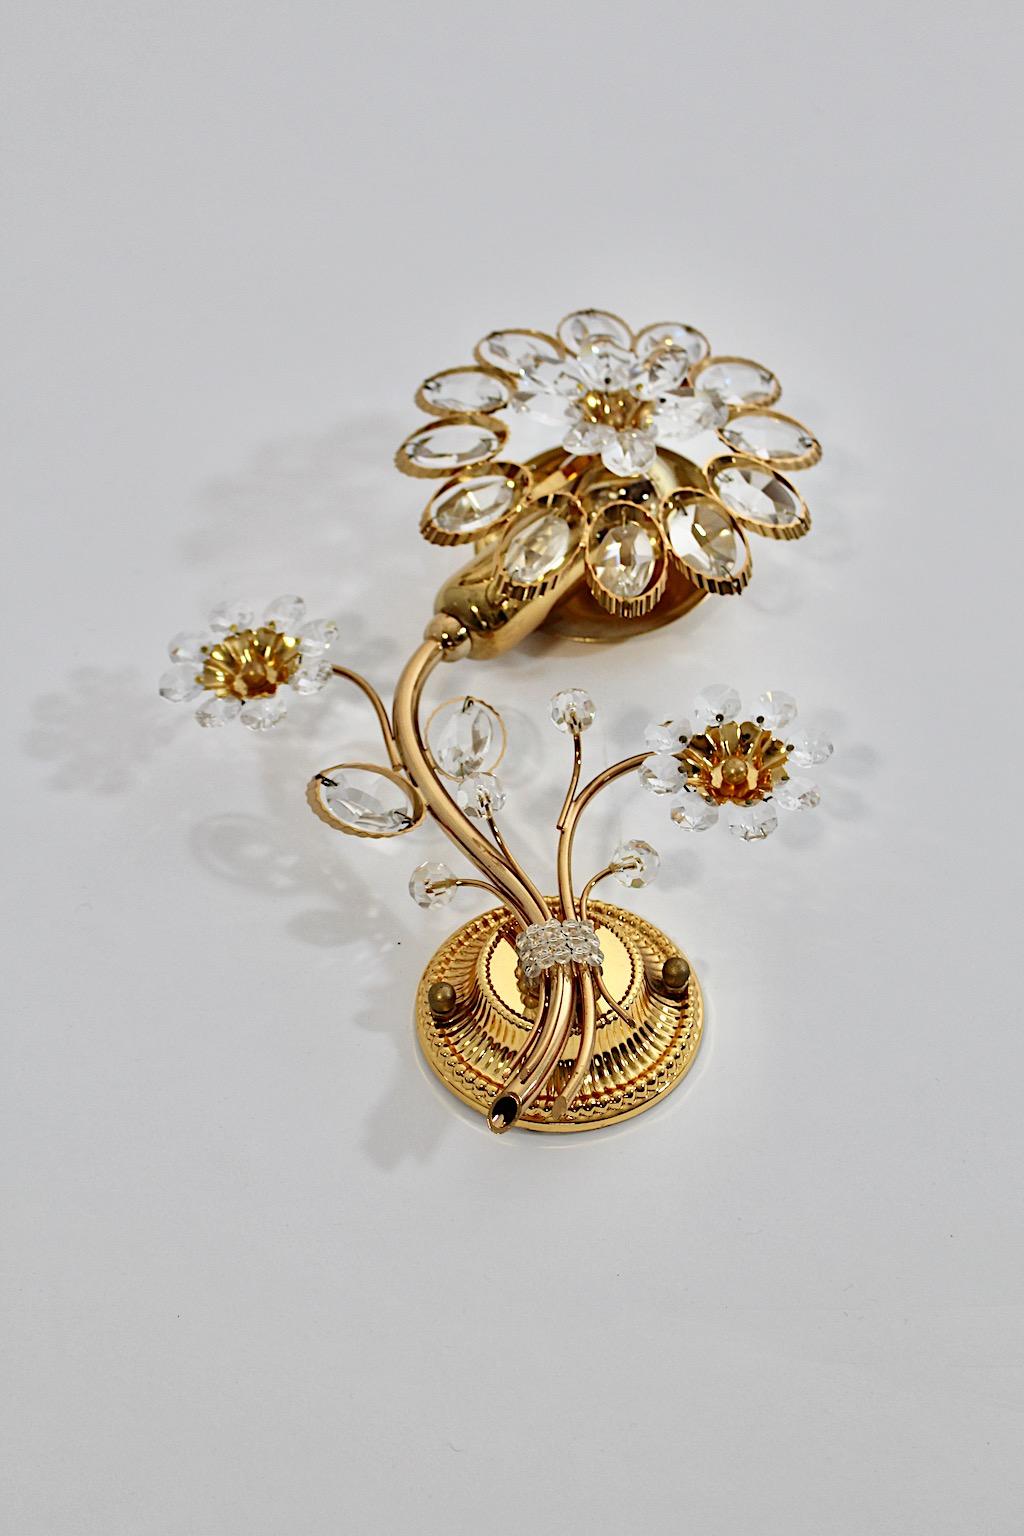 Hollywood Regency Style vintage sconce or wall light solo flower from 
gilt brass and clear crystal Palwa, 1960s.
A stunning sconce or wall light solo flower like with stylized leaves and nice flower heads by Palwa, 1960s Germany.
This stunning wall